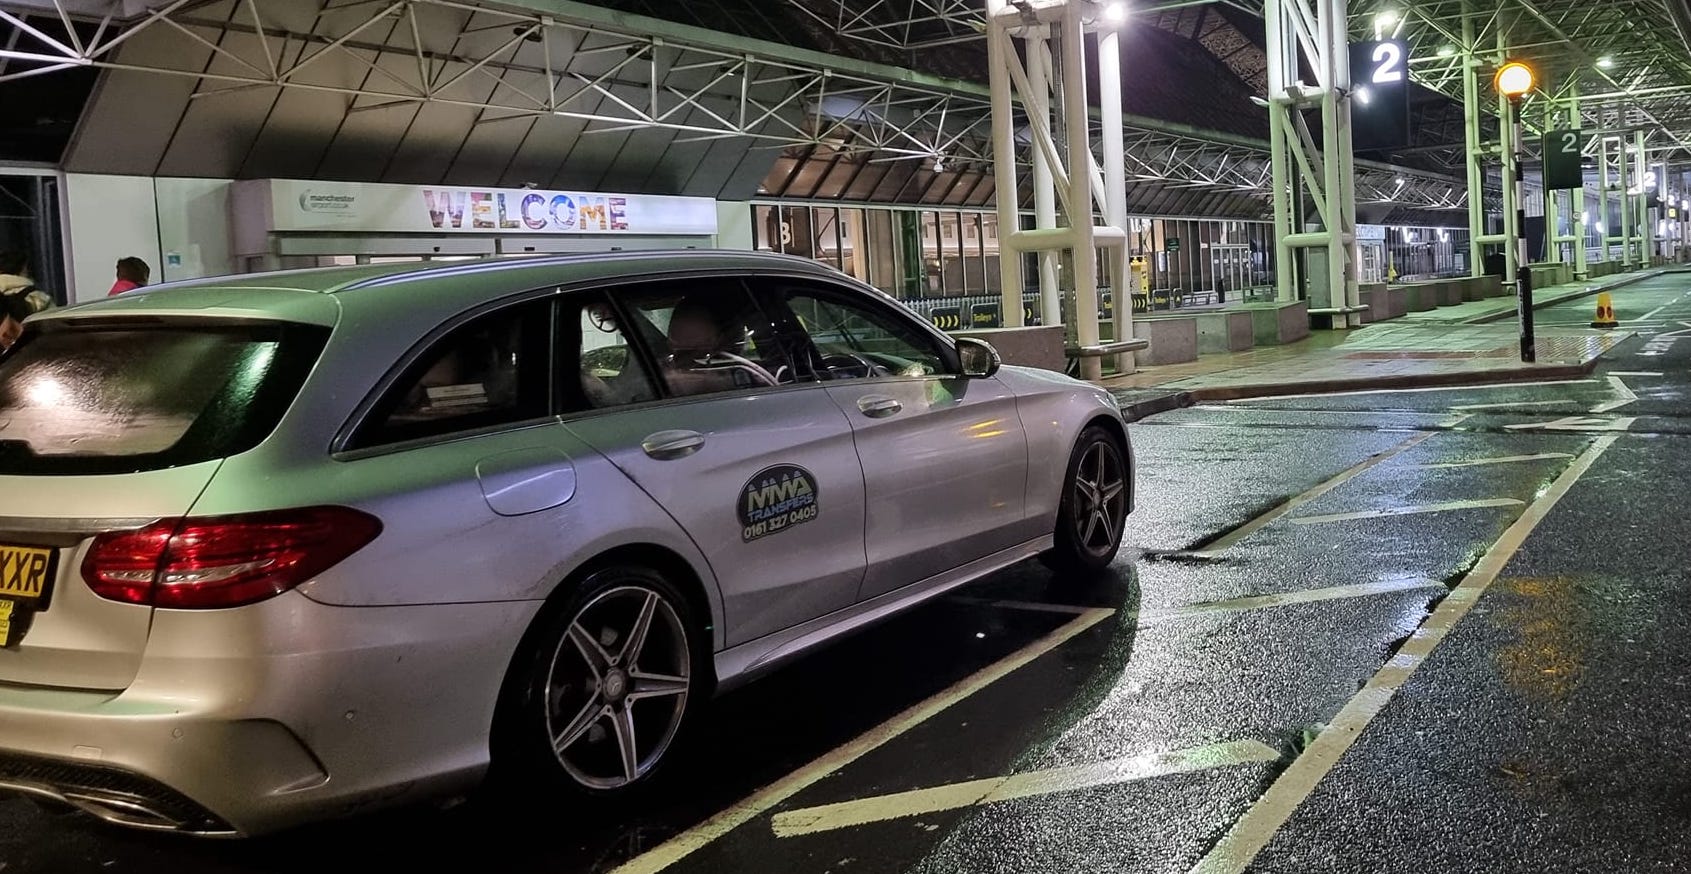 Take a Taxi from Manchester Airport to Newcastle upon Tyne with a free Meet and Greet Service